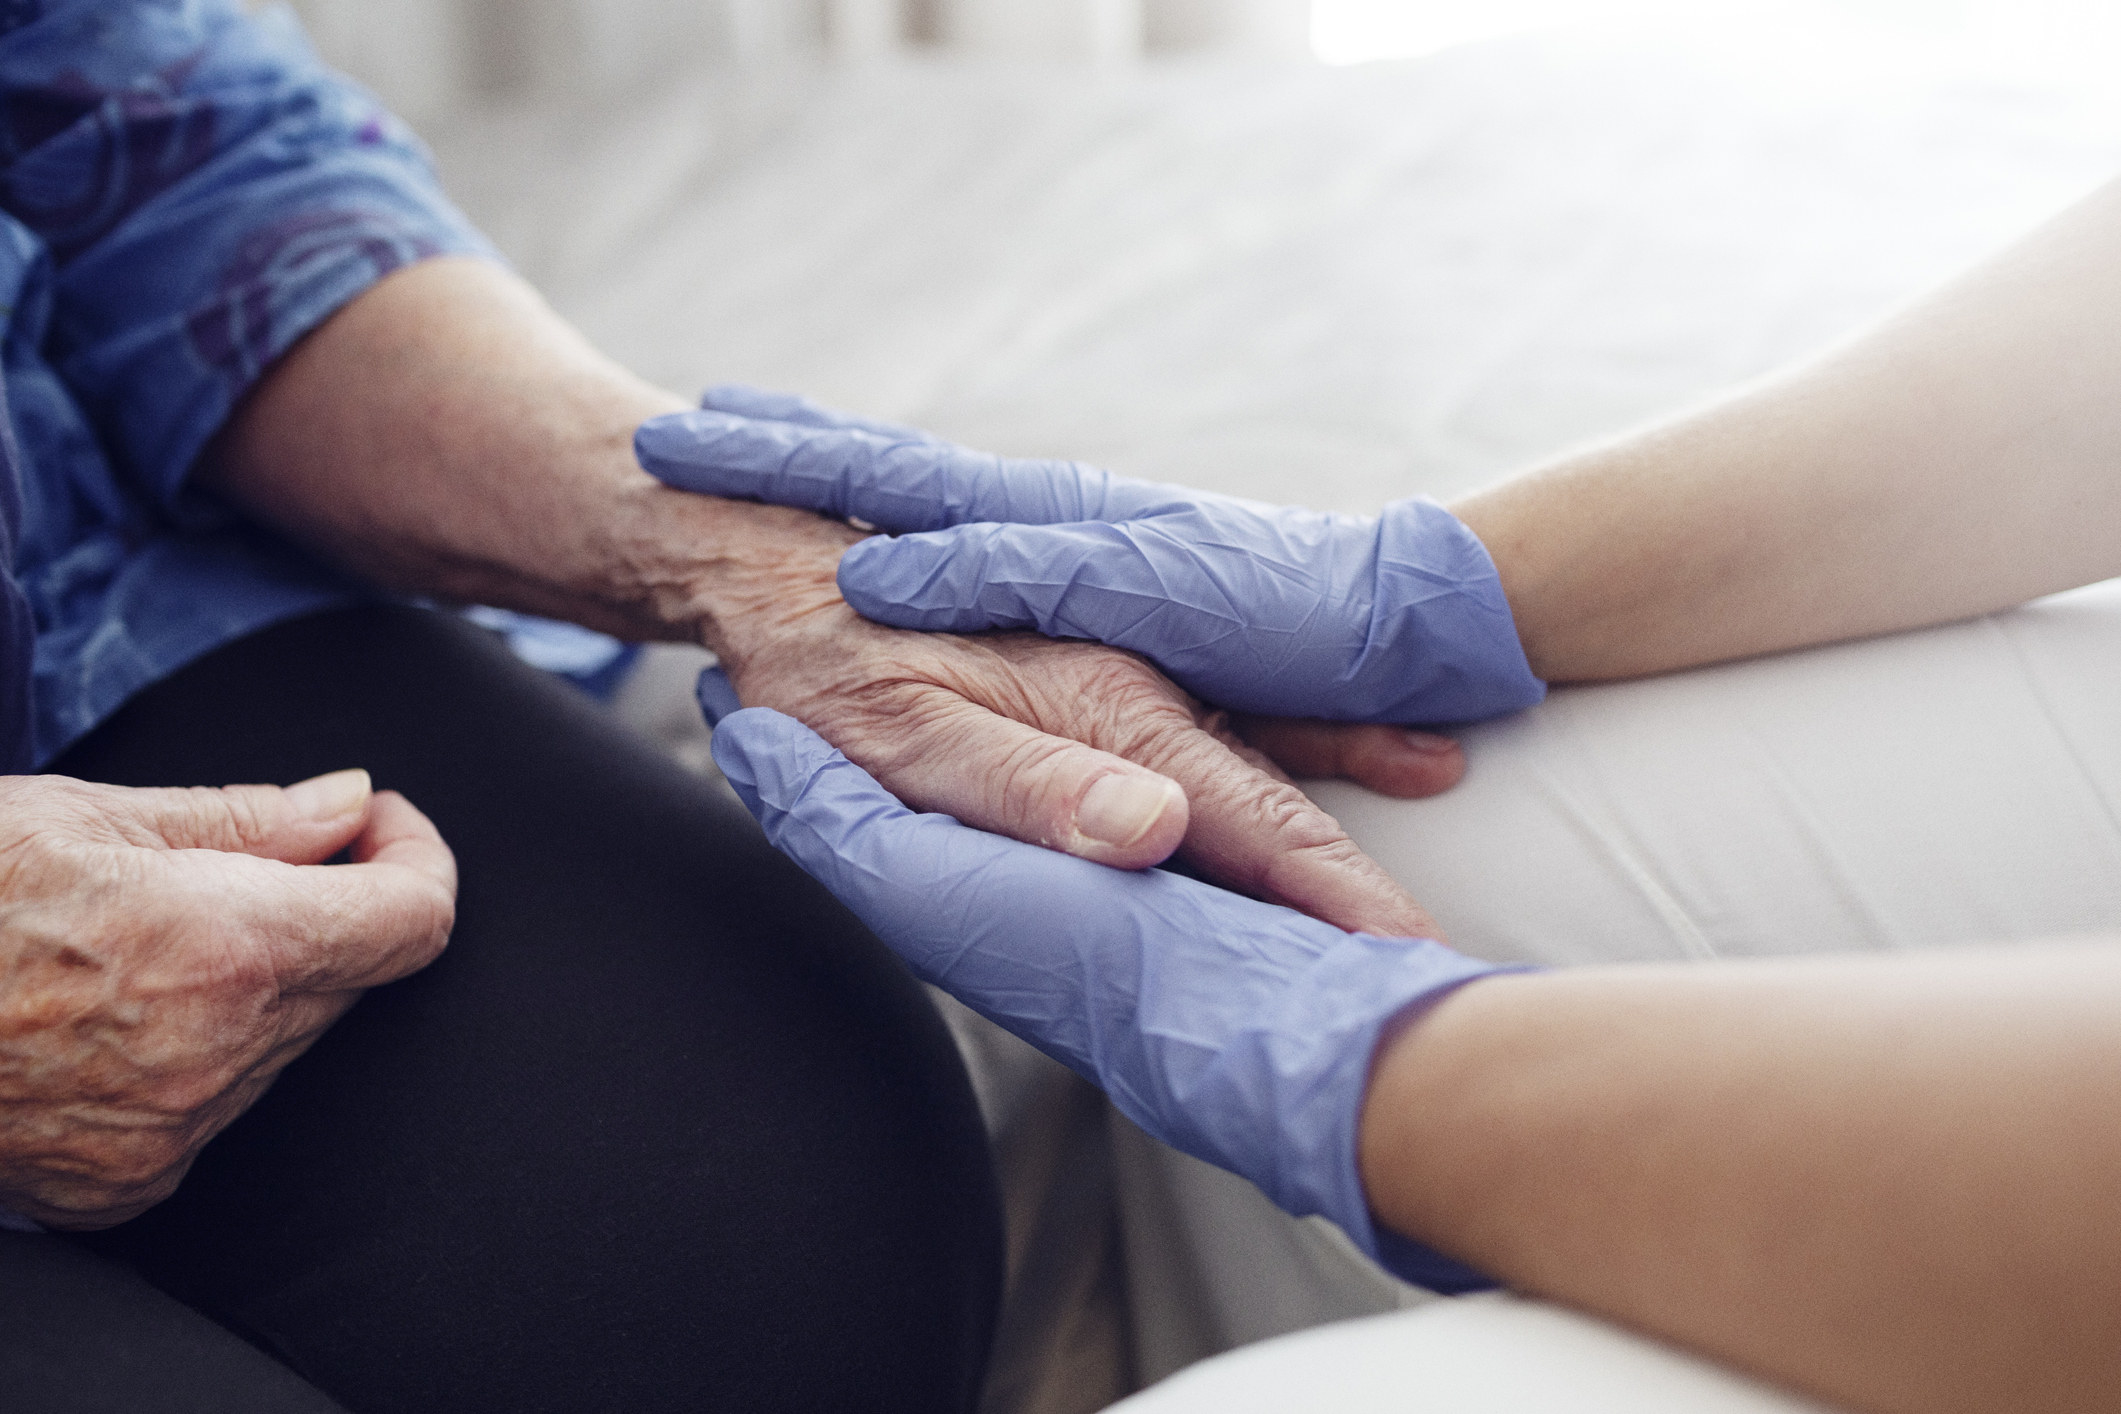 A healthcare worker holding the hand of an older person